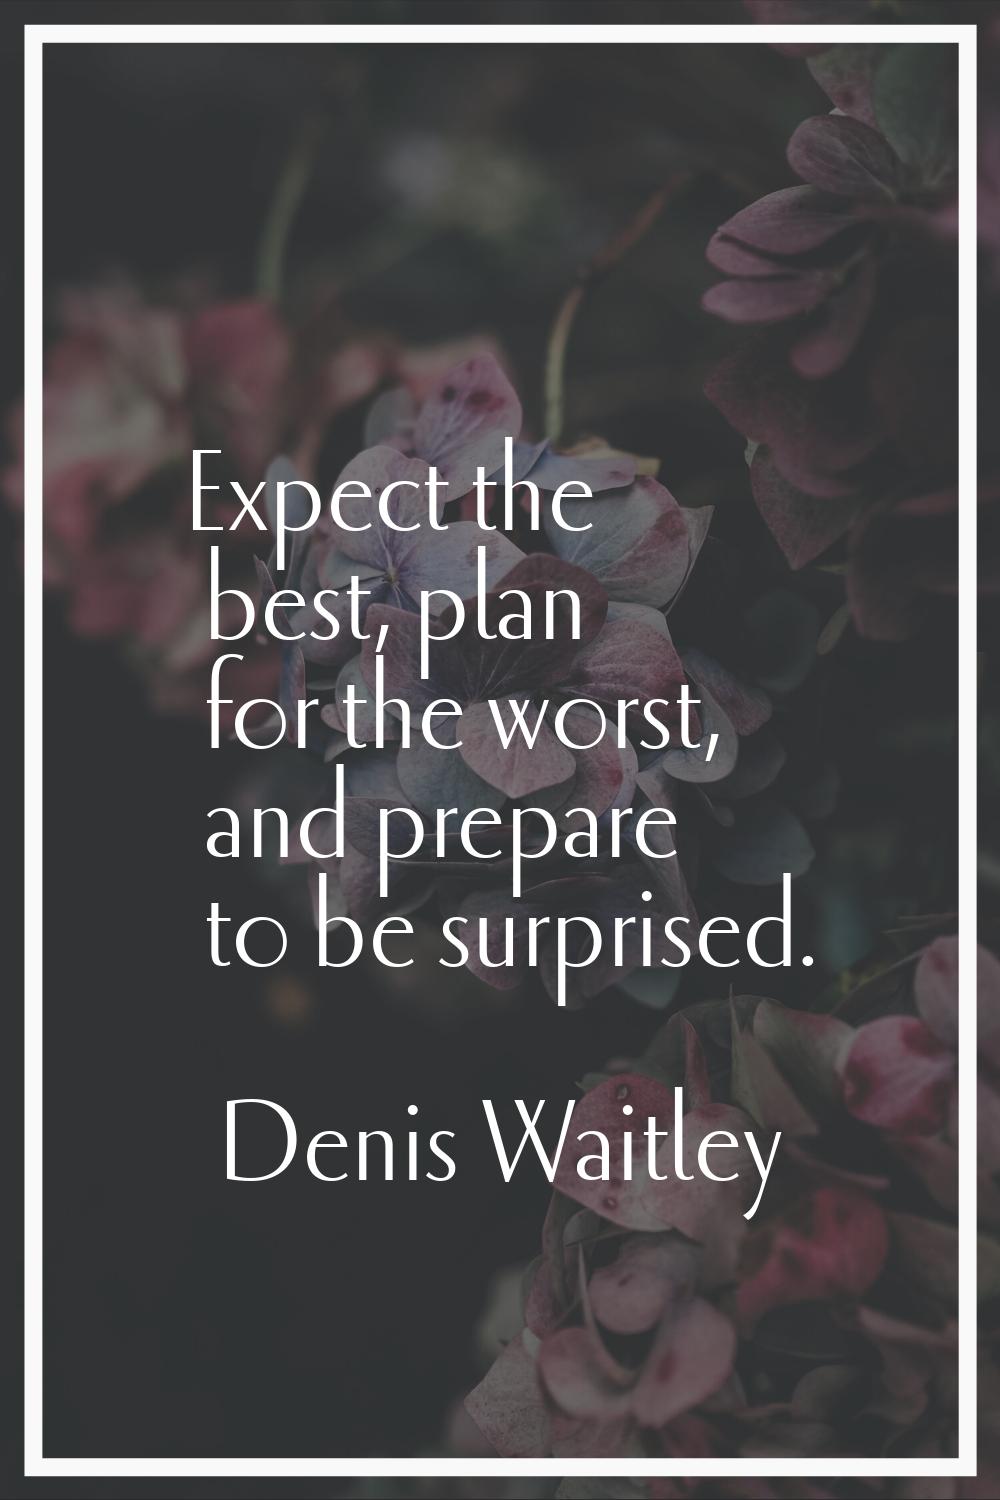 Expect the best, plan for the worst, and prepare to be surprised.